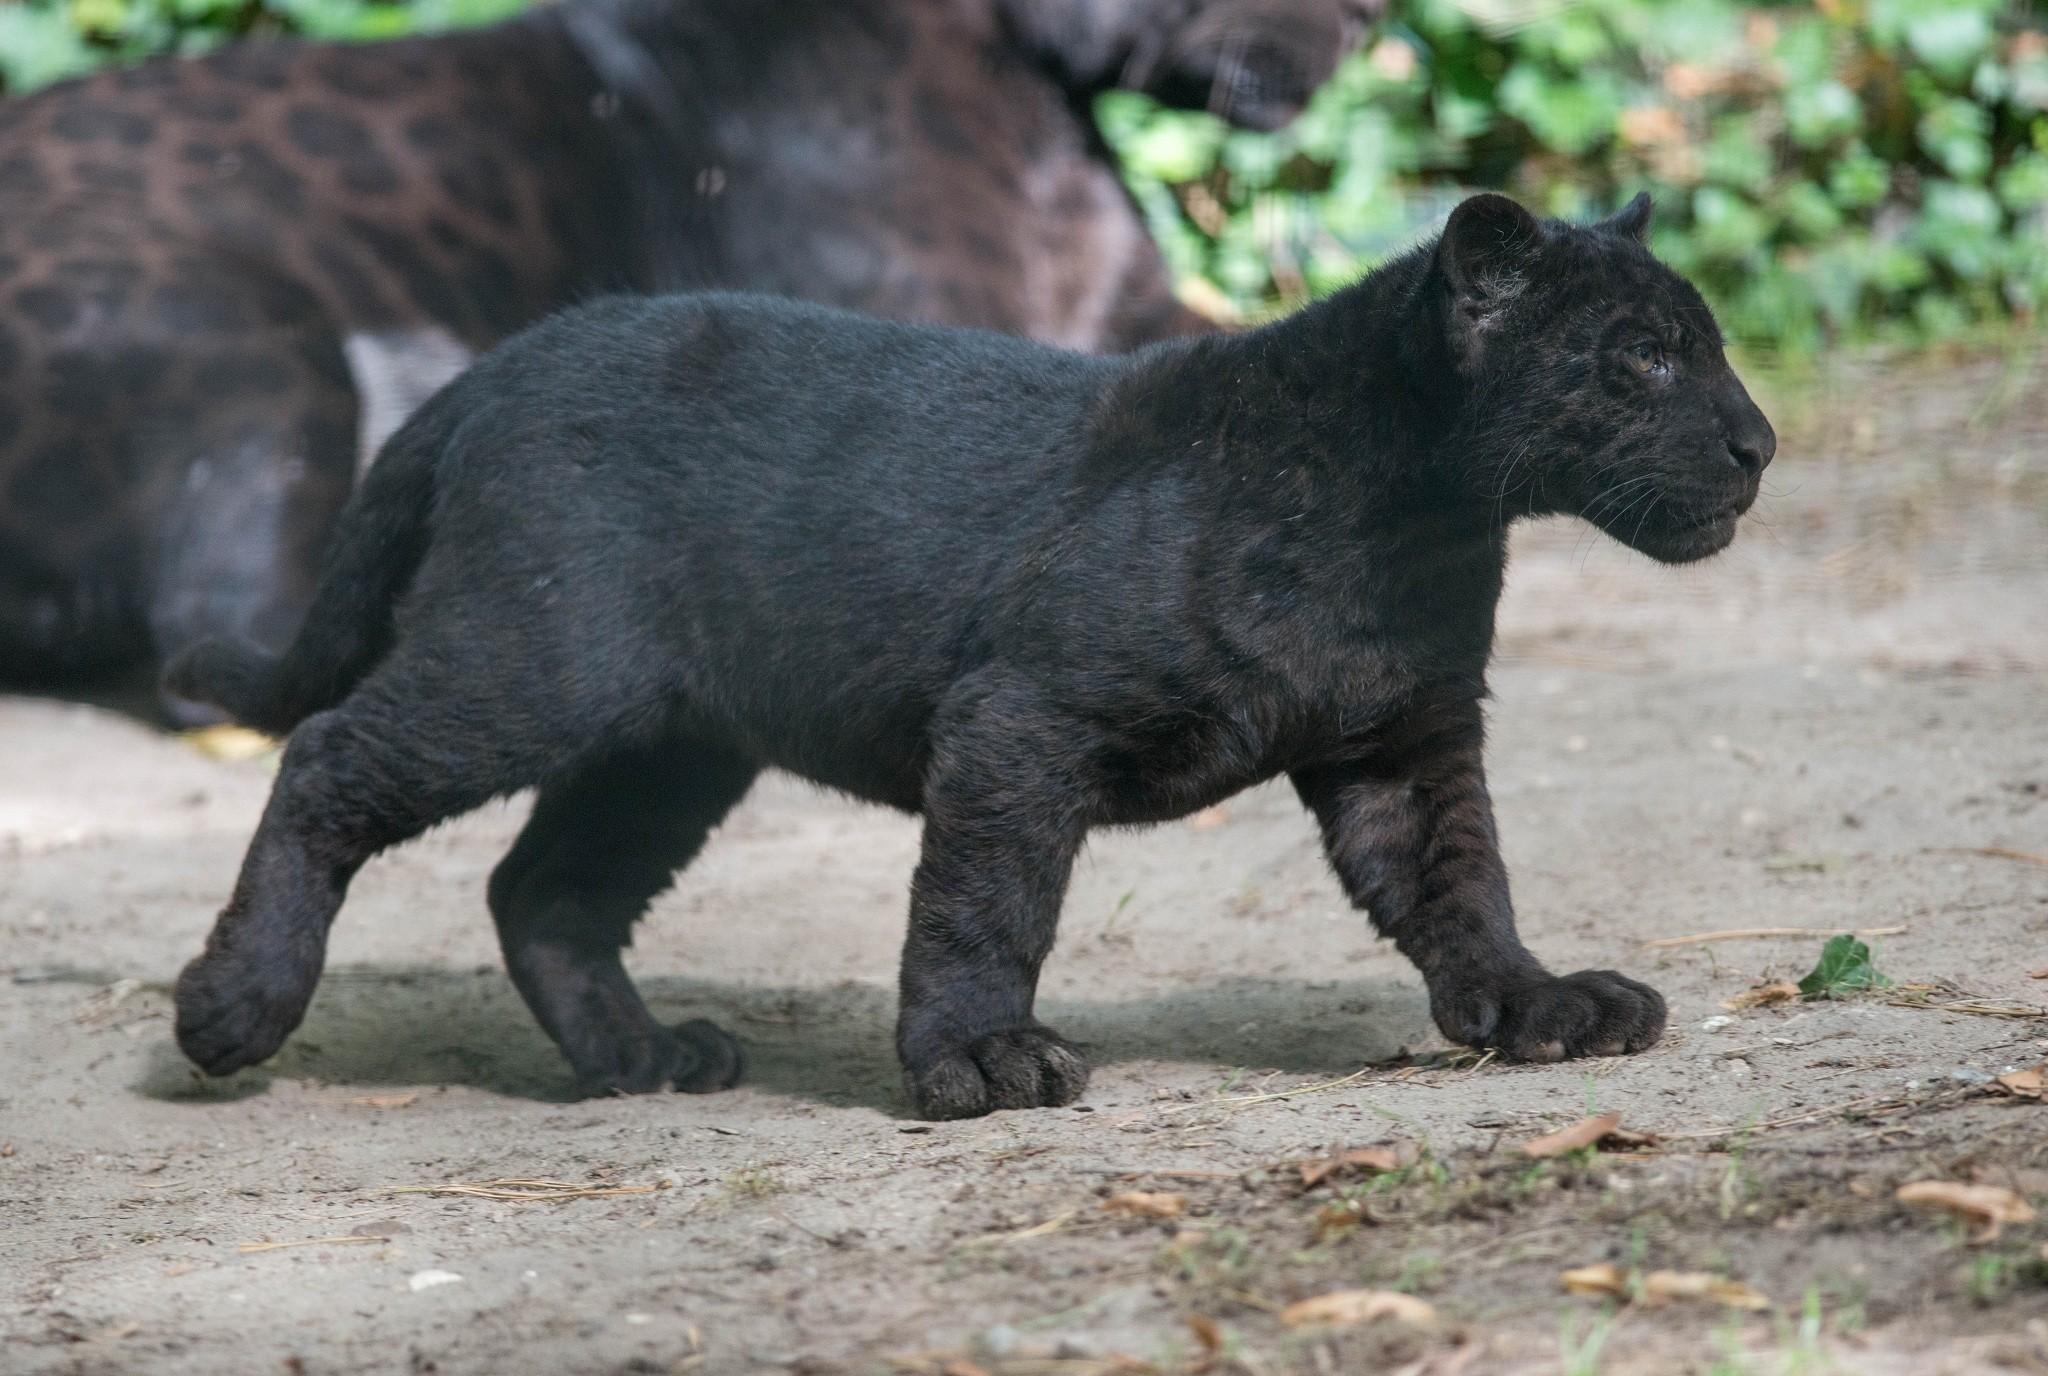 #cubs, #baby animals, #panthers, #wild cat